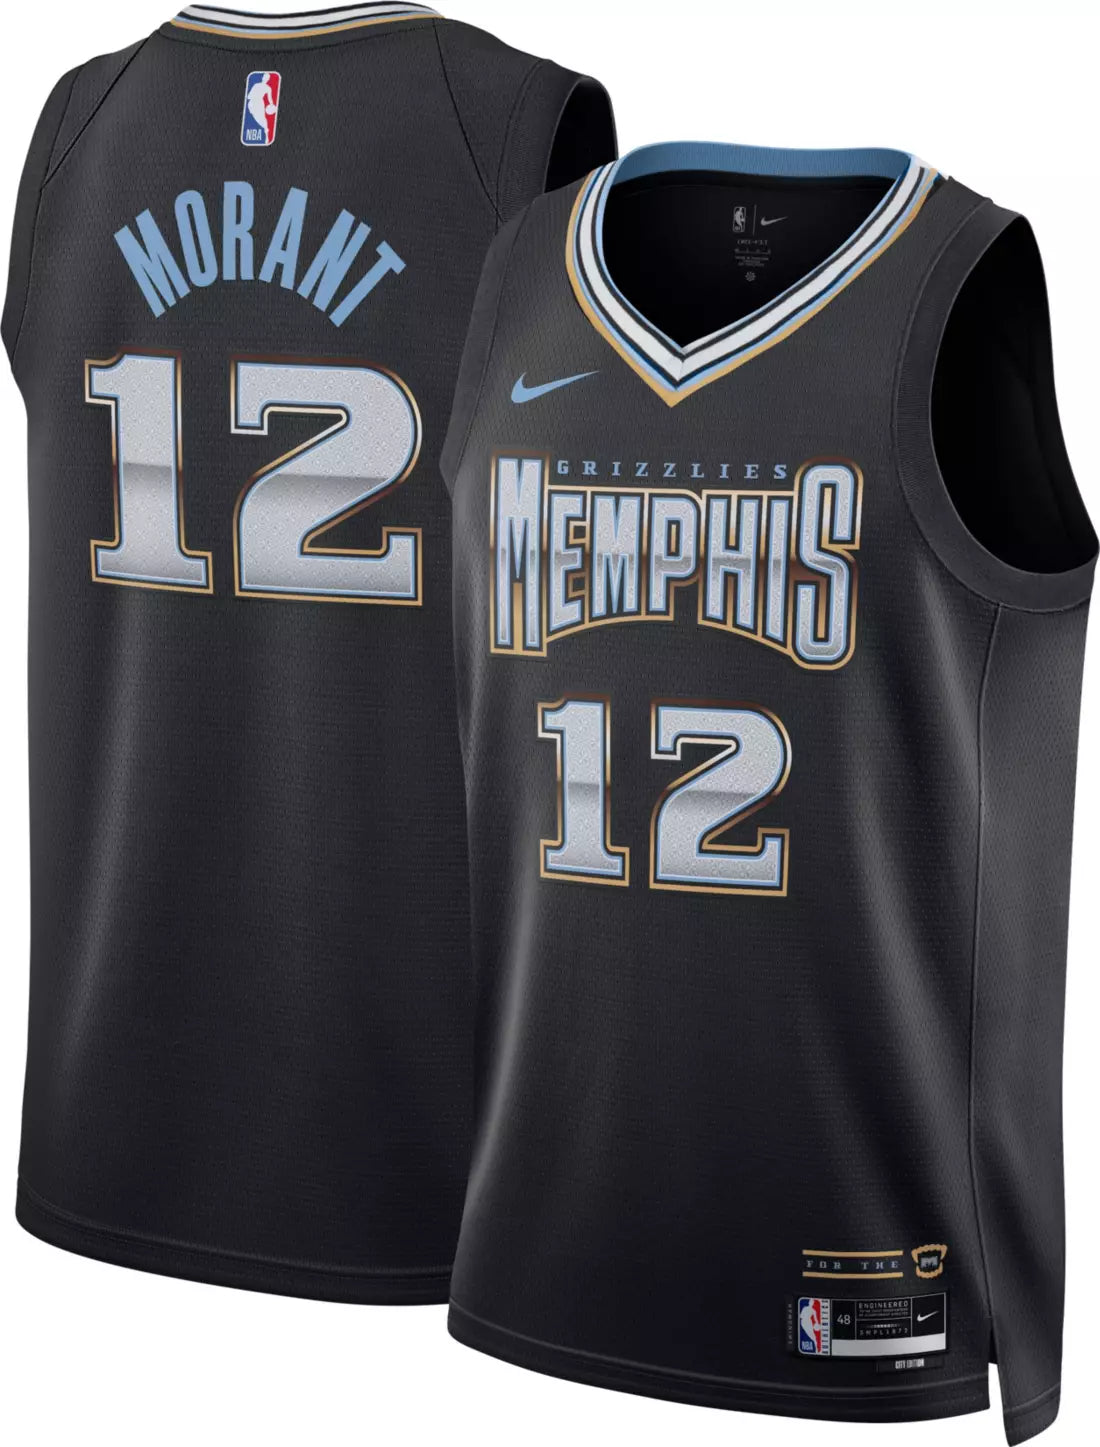 Nike, Shirts, Authentic Brand New Blank Nba Basketball Memphis Grizzlies  Jersey